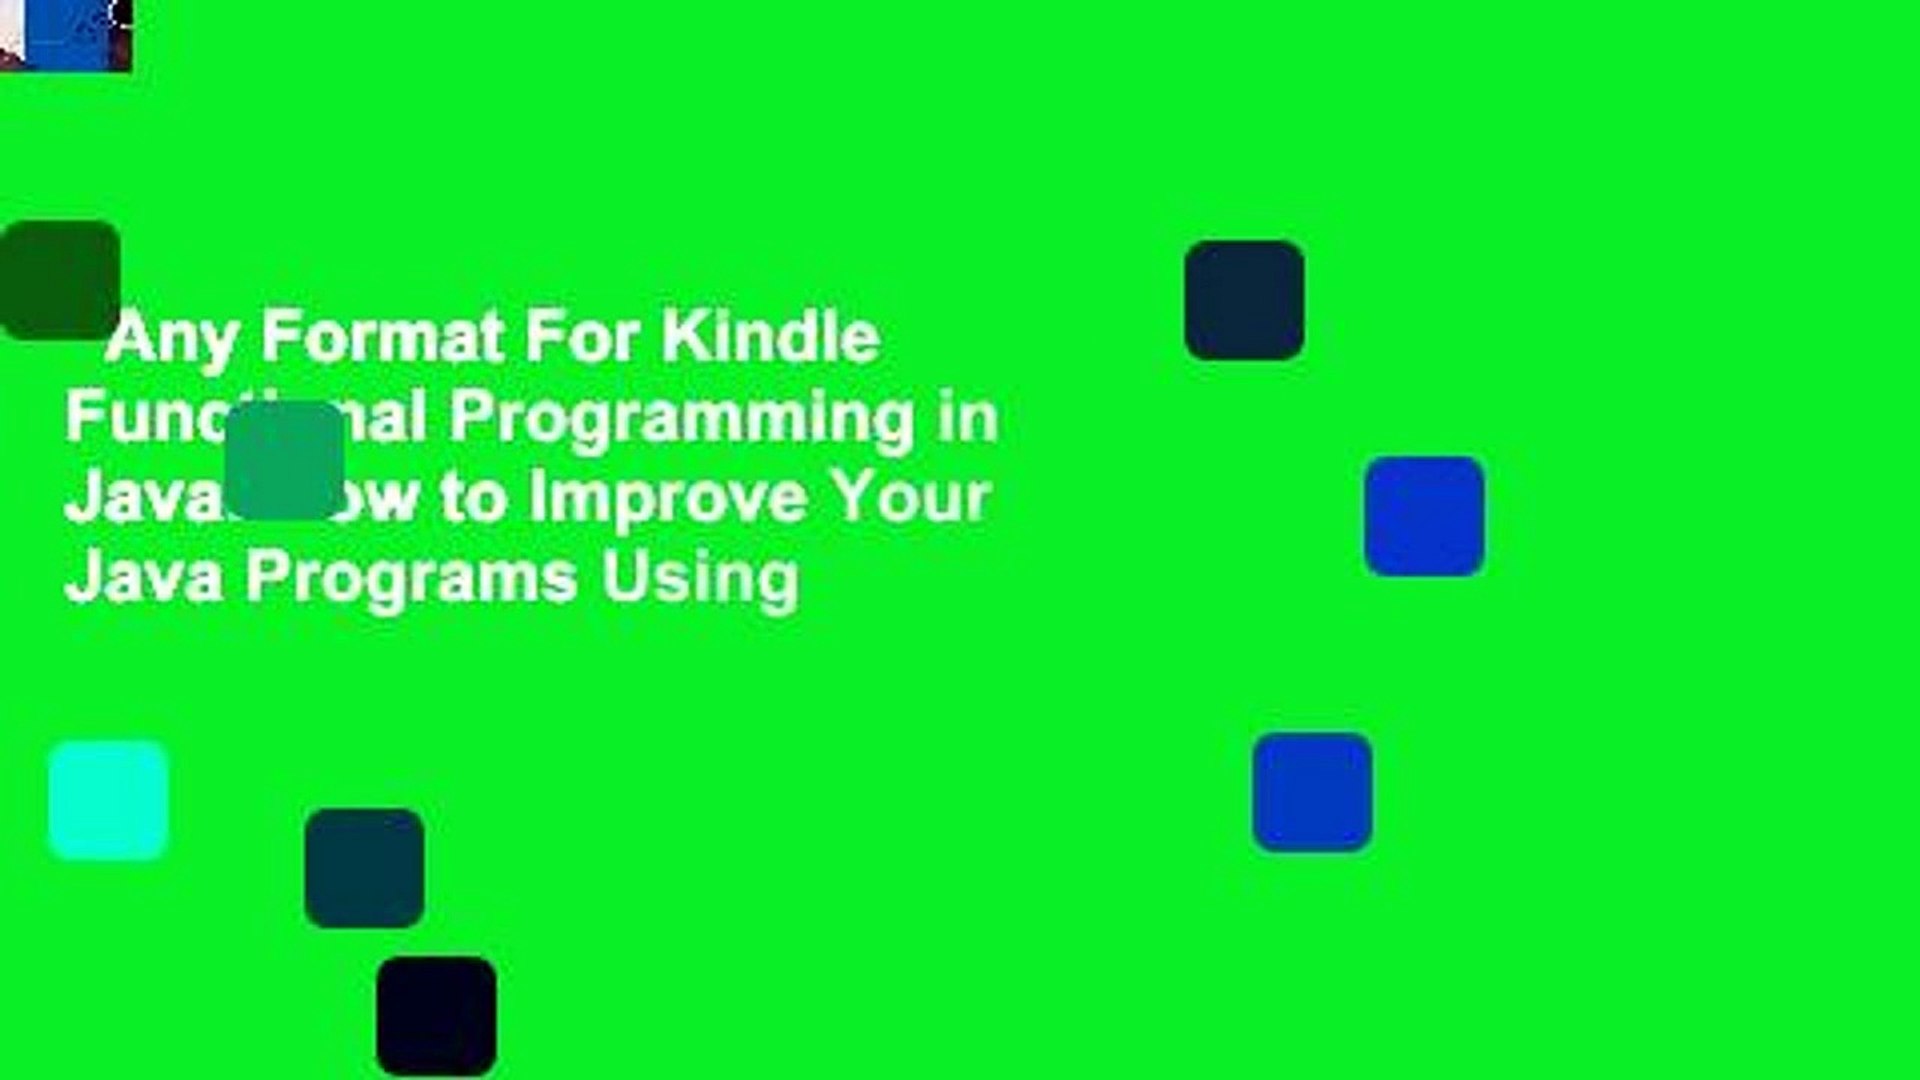 Any Format For Kindle  Functional Programming in Java: How to Improve Your Java Programs Using